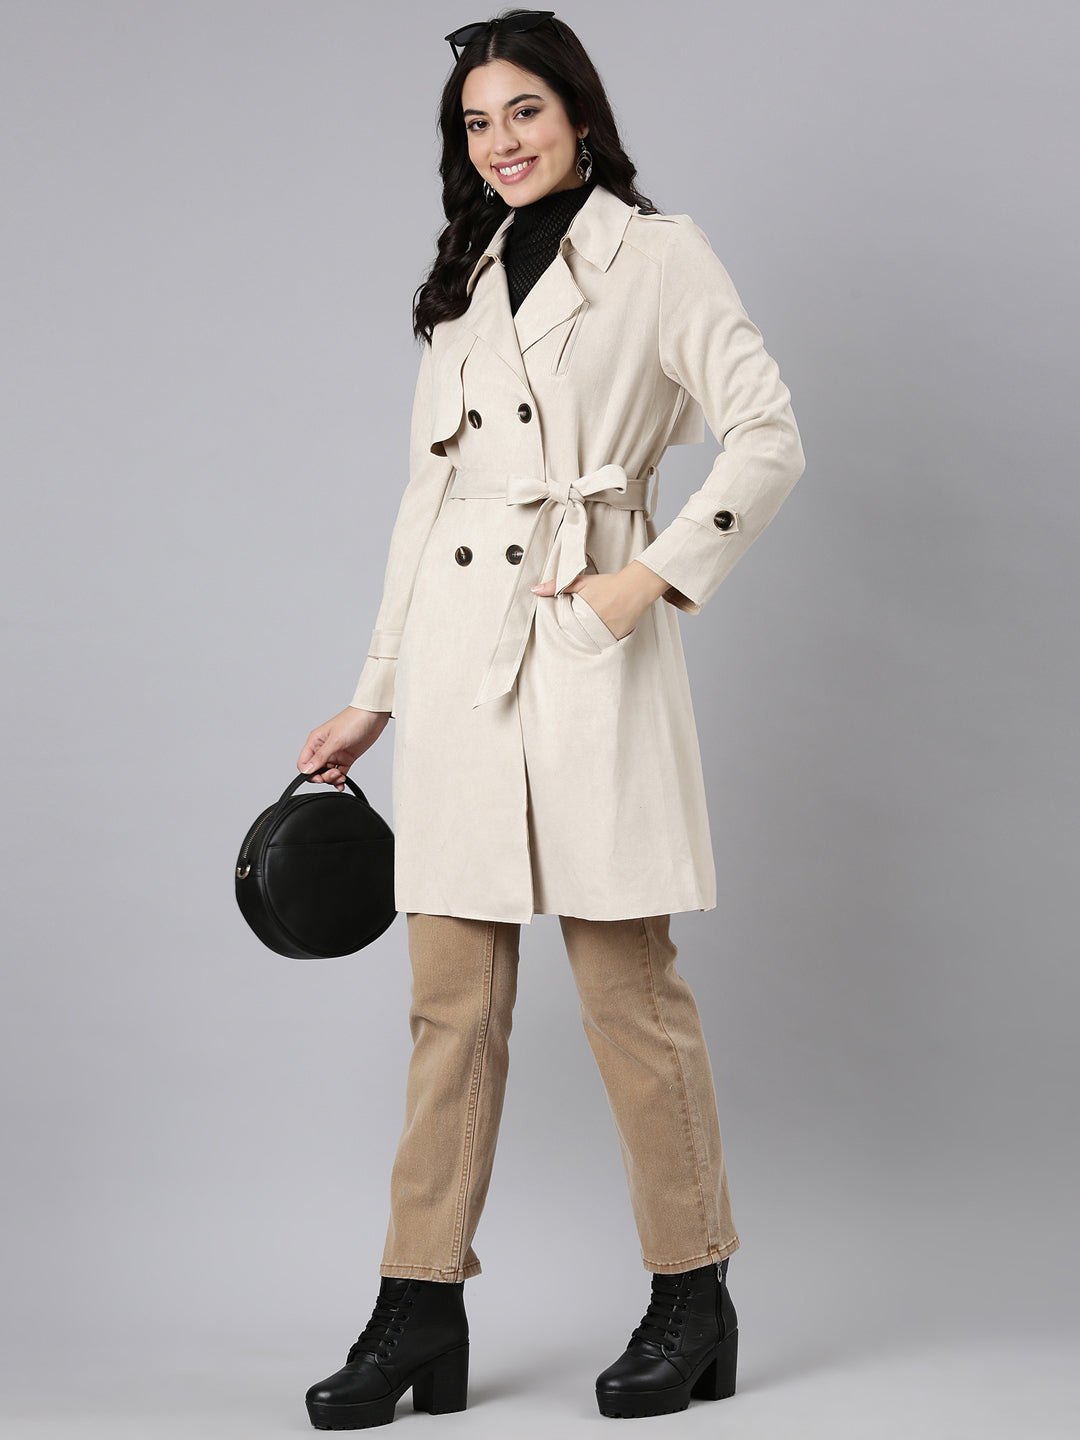 Women Solid Longline Cream Trench Coat comes with Belt